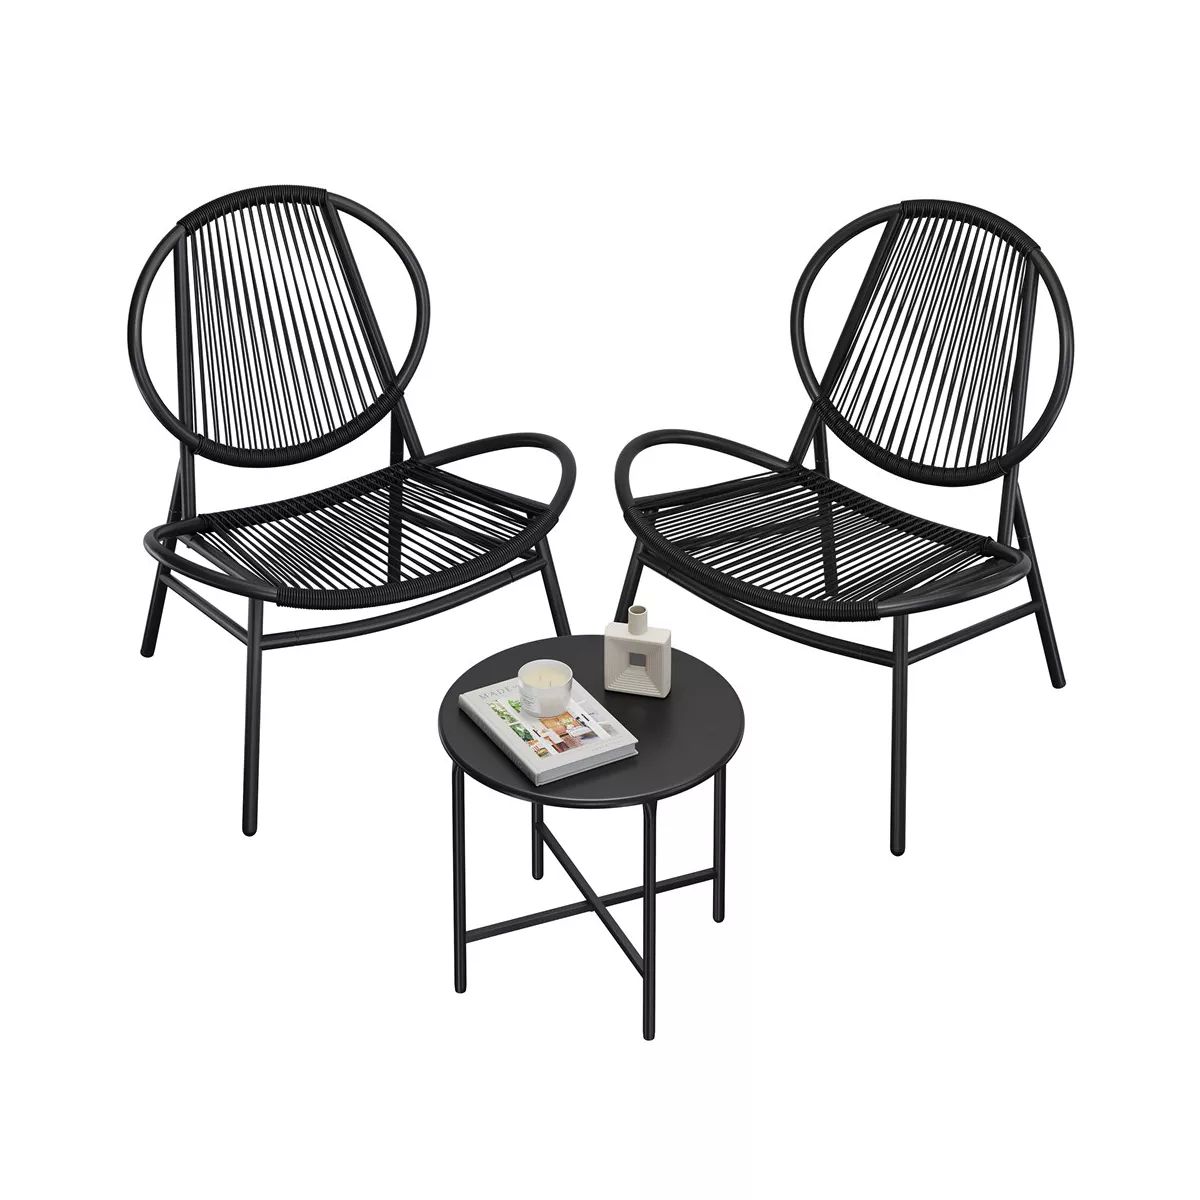 SONGMICS Patio Furniture Set 3 Pieces, Garden Bistro Set, Acapulco Chairs, Outdoor Seating, Side ... | Target